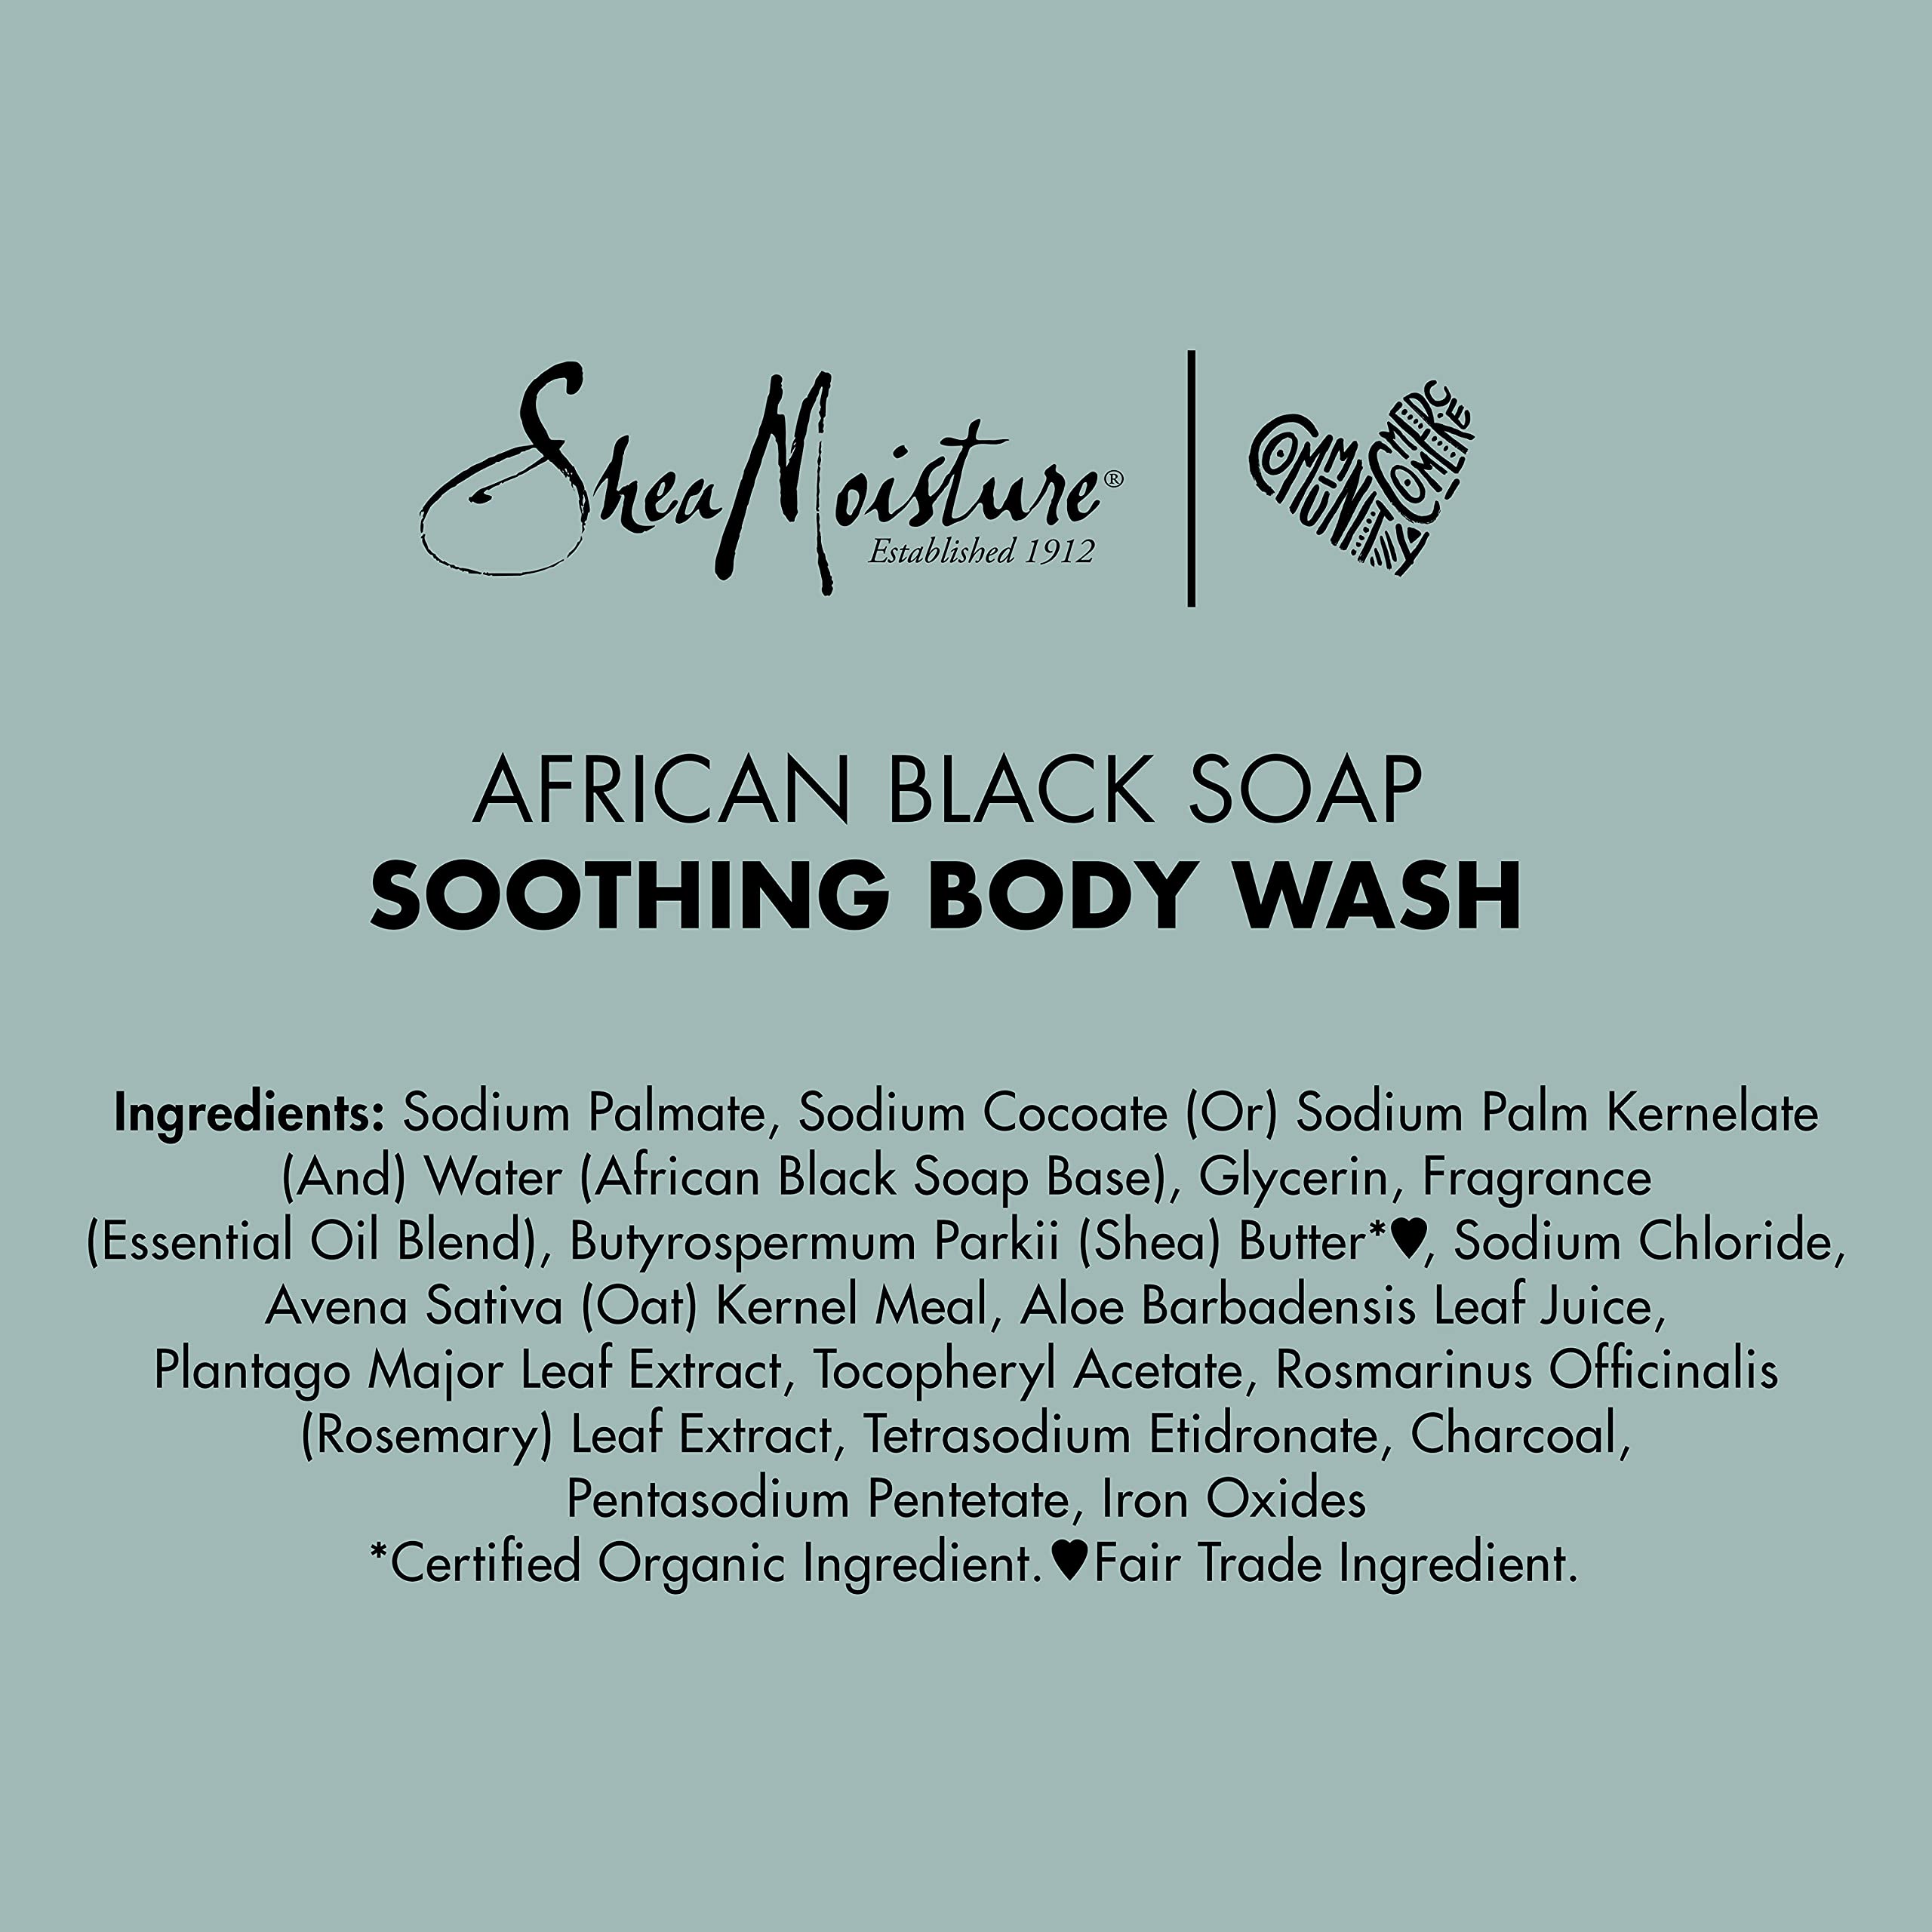 SheaMoisture Soothing Body Wash for Acne Treatment African Black Soap Paraben Free Body Wash 13 oz